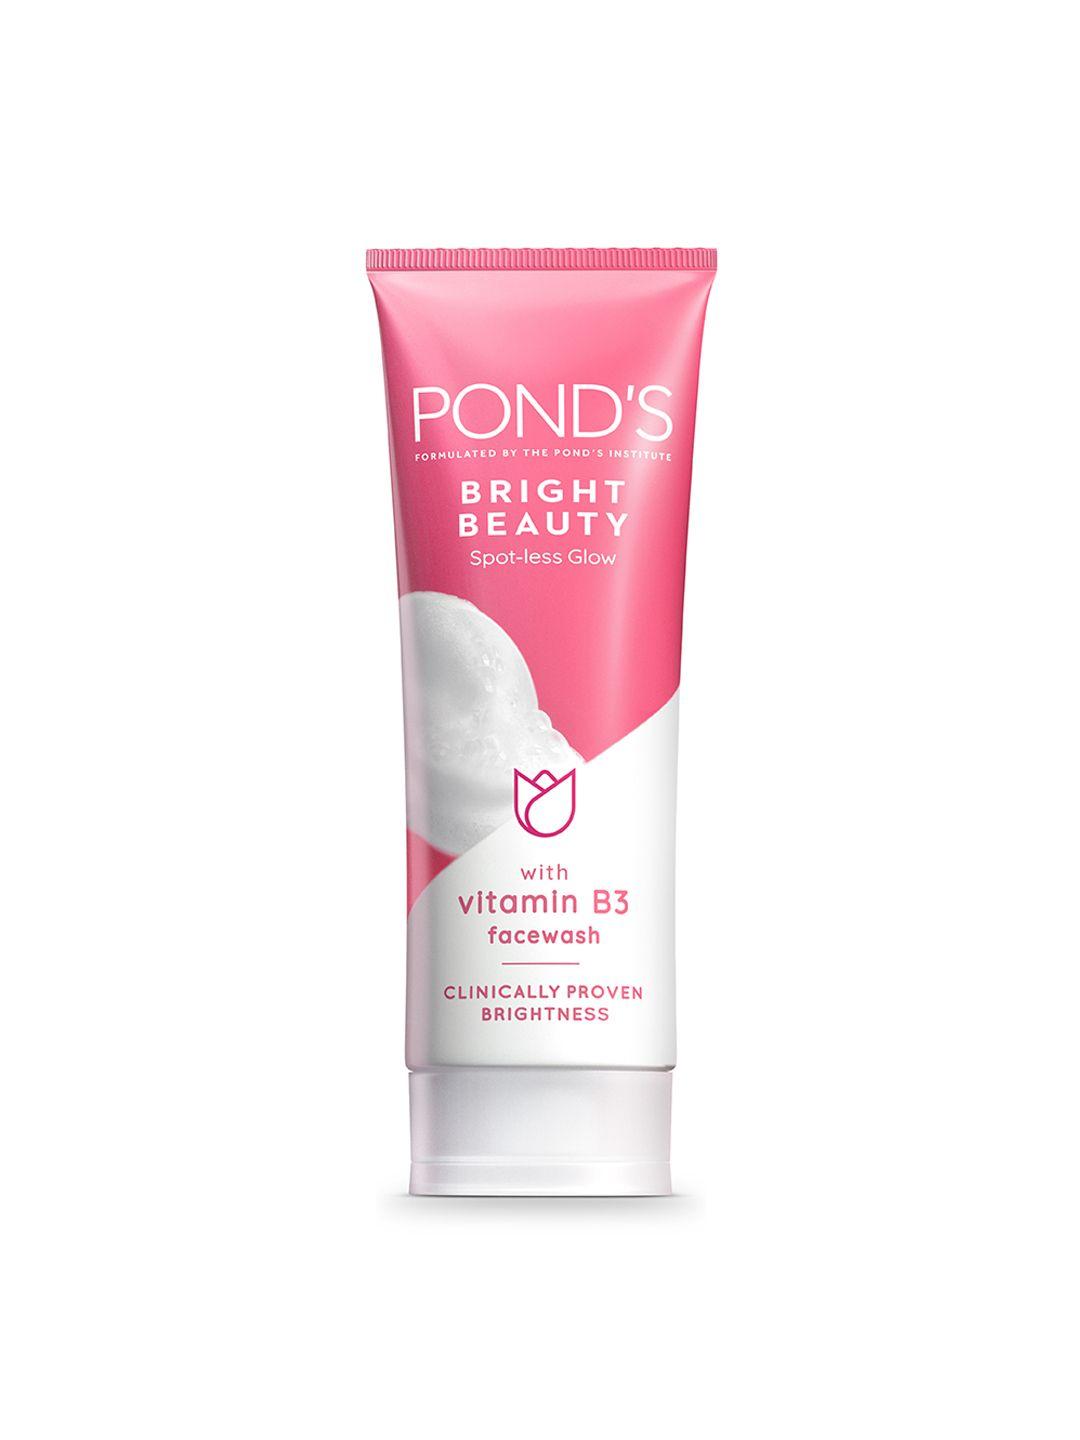 ponds-bright-beauty-spot-less-glow-face-wash-with-vitamins---100-g